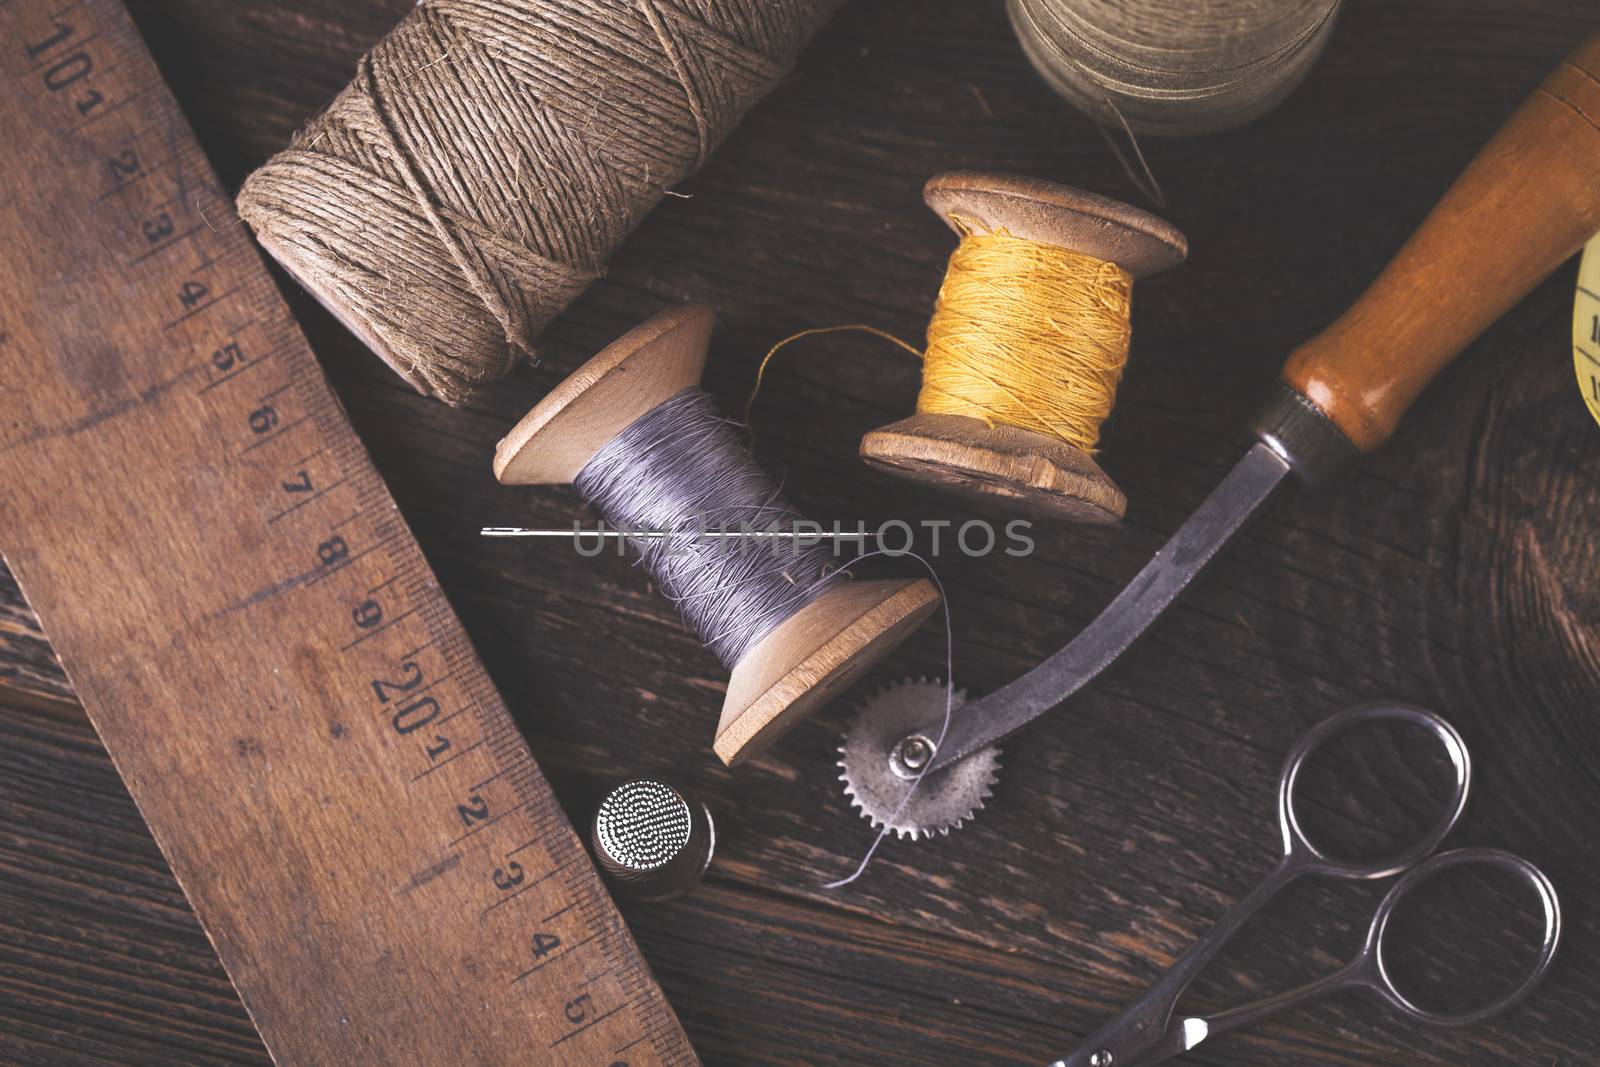 Sewing instruments, threads, needles in vintaae style by fikmik